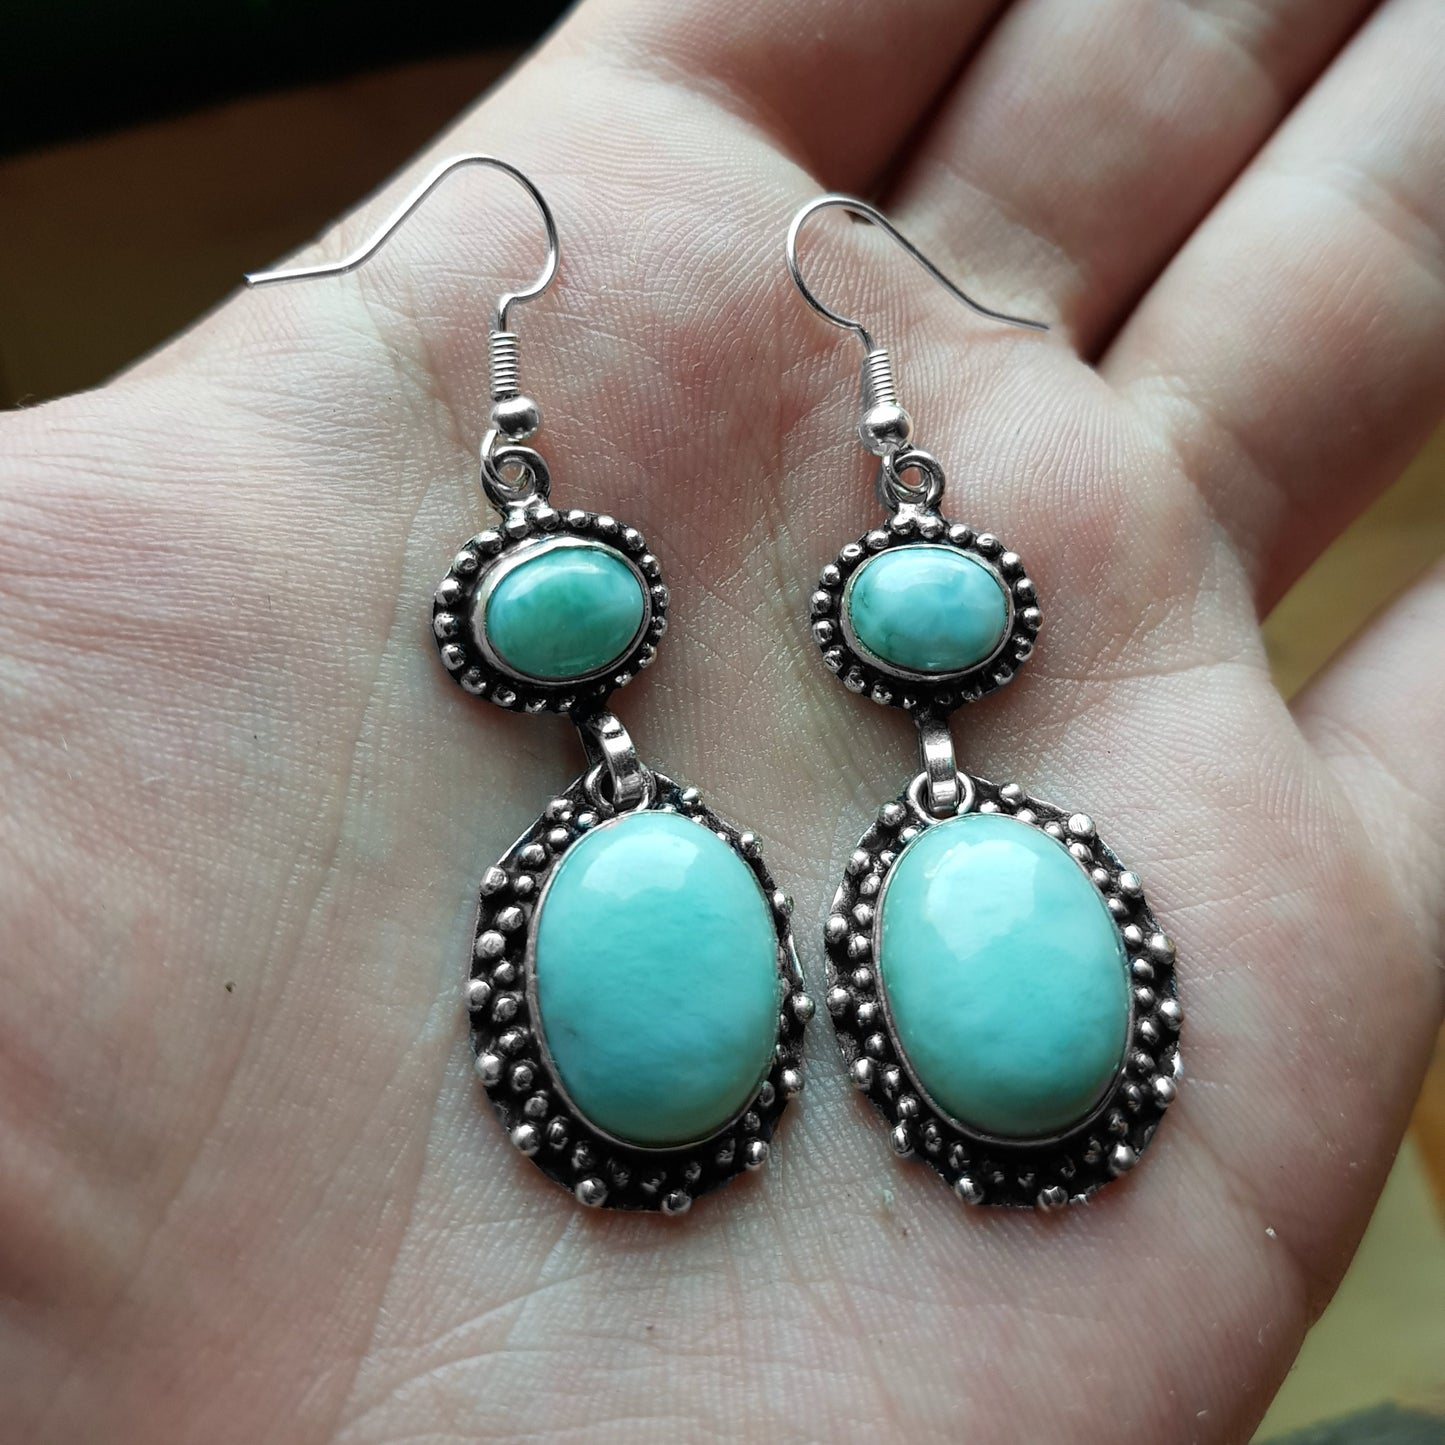 Larimar Dangle Earrings In Sterling Silver Earrings Ethnic Earrings Unique Gift For Her One Of A Kind Gift